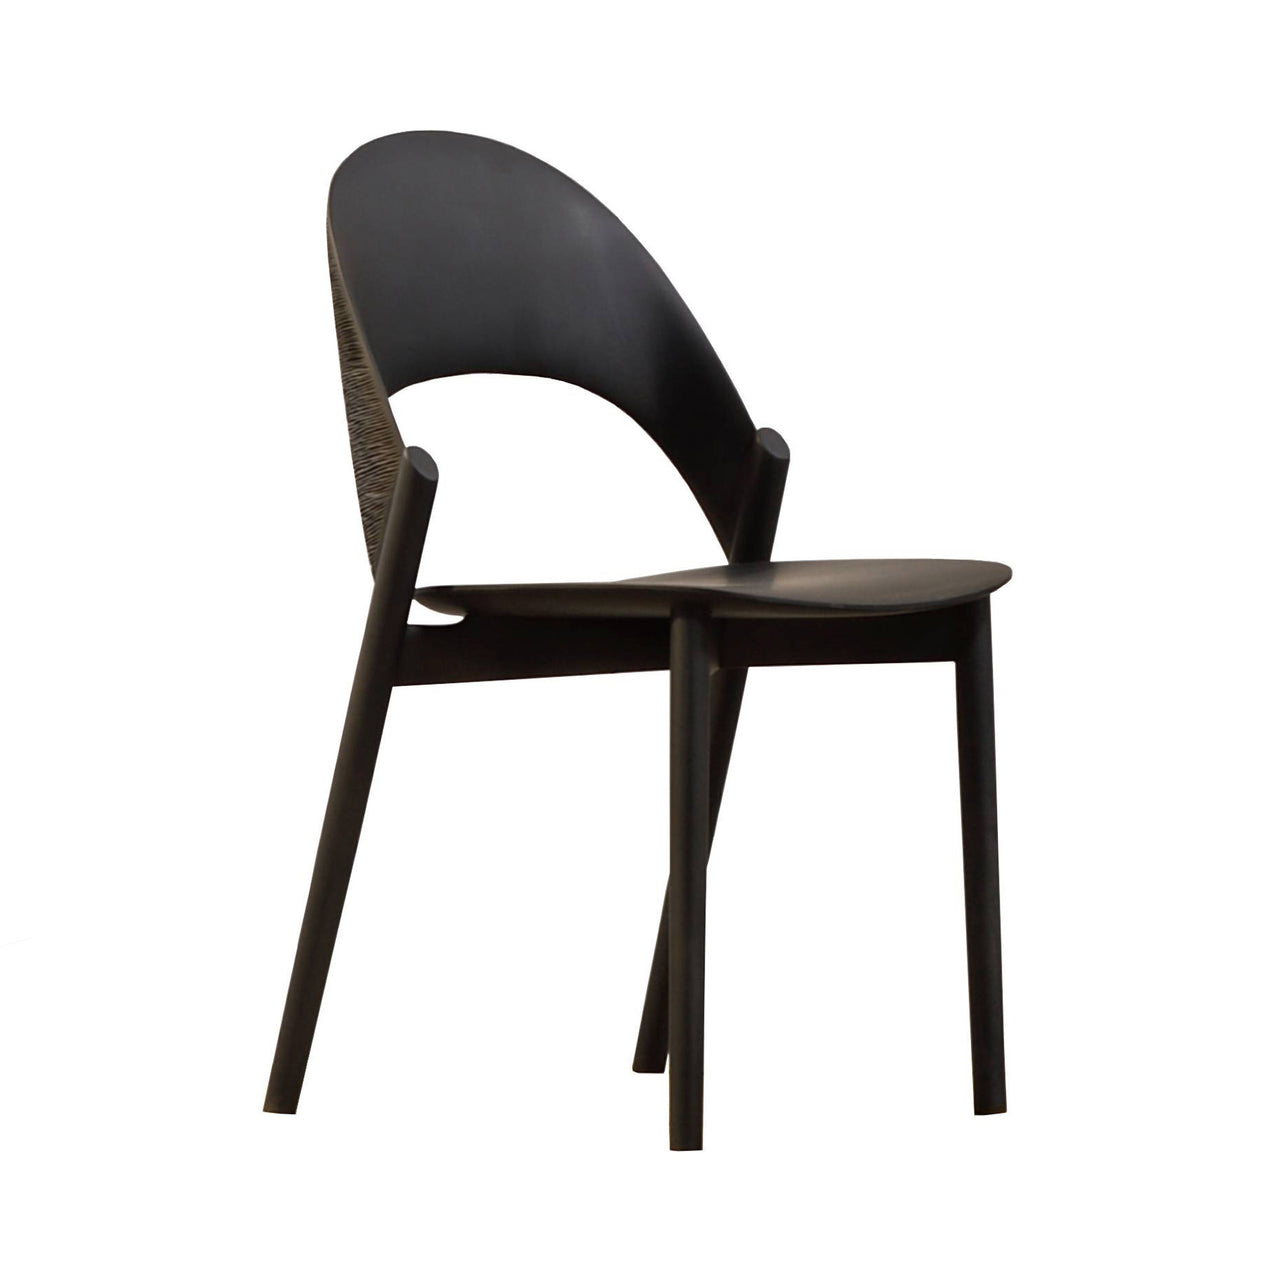 Sana Chair: Black Maple + Woven + Without Cushion